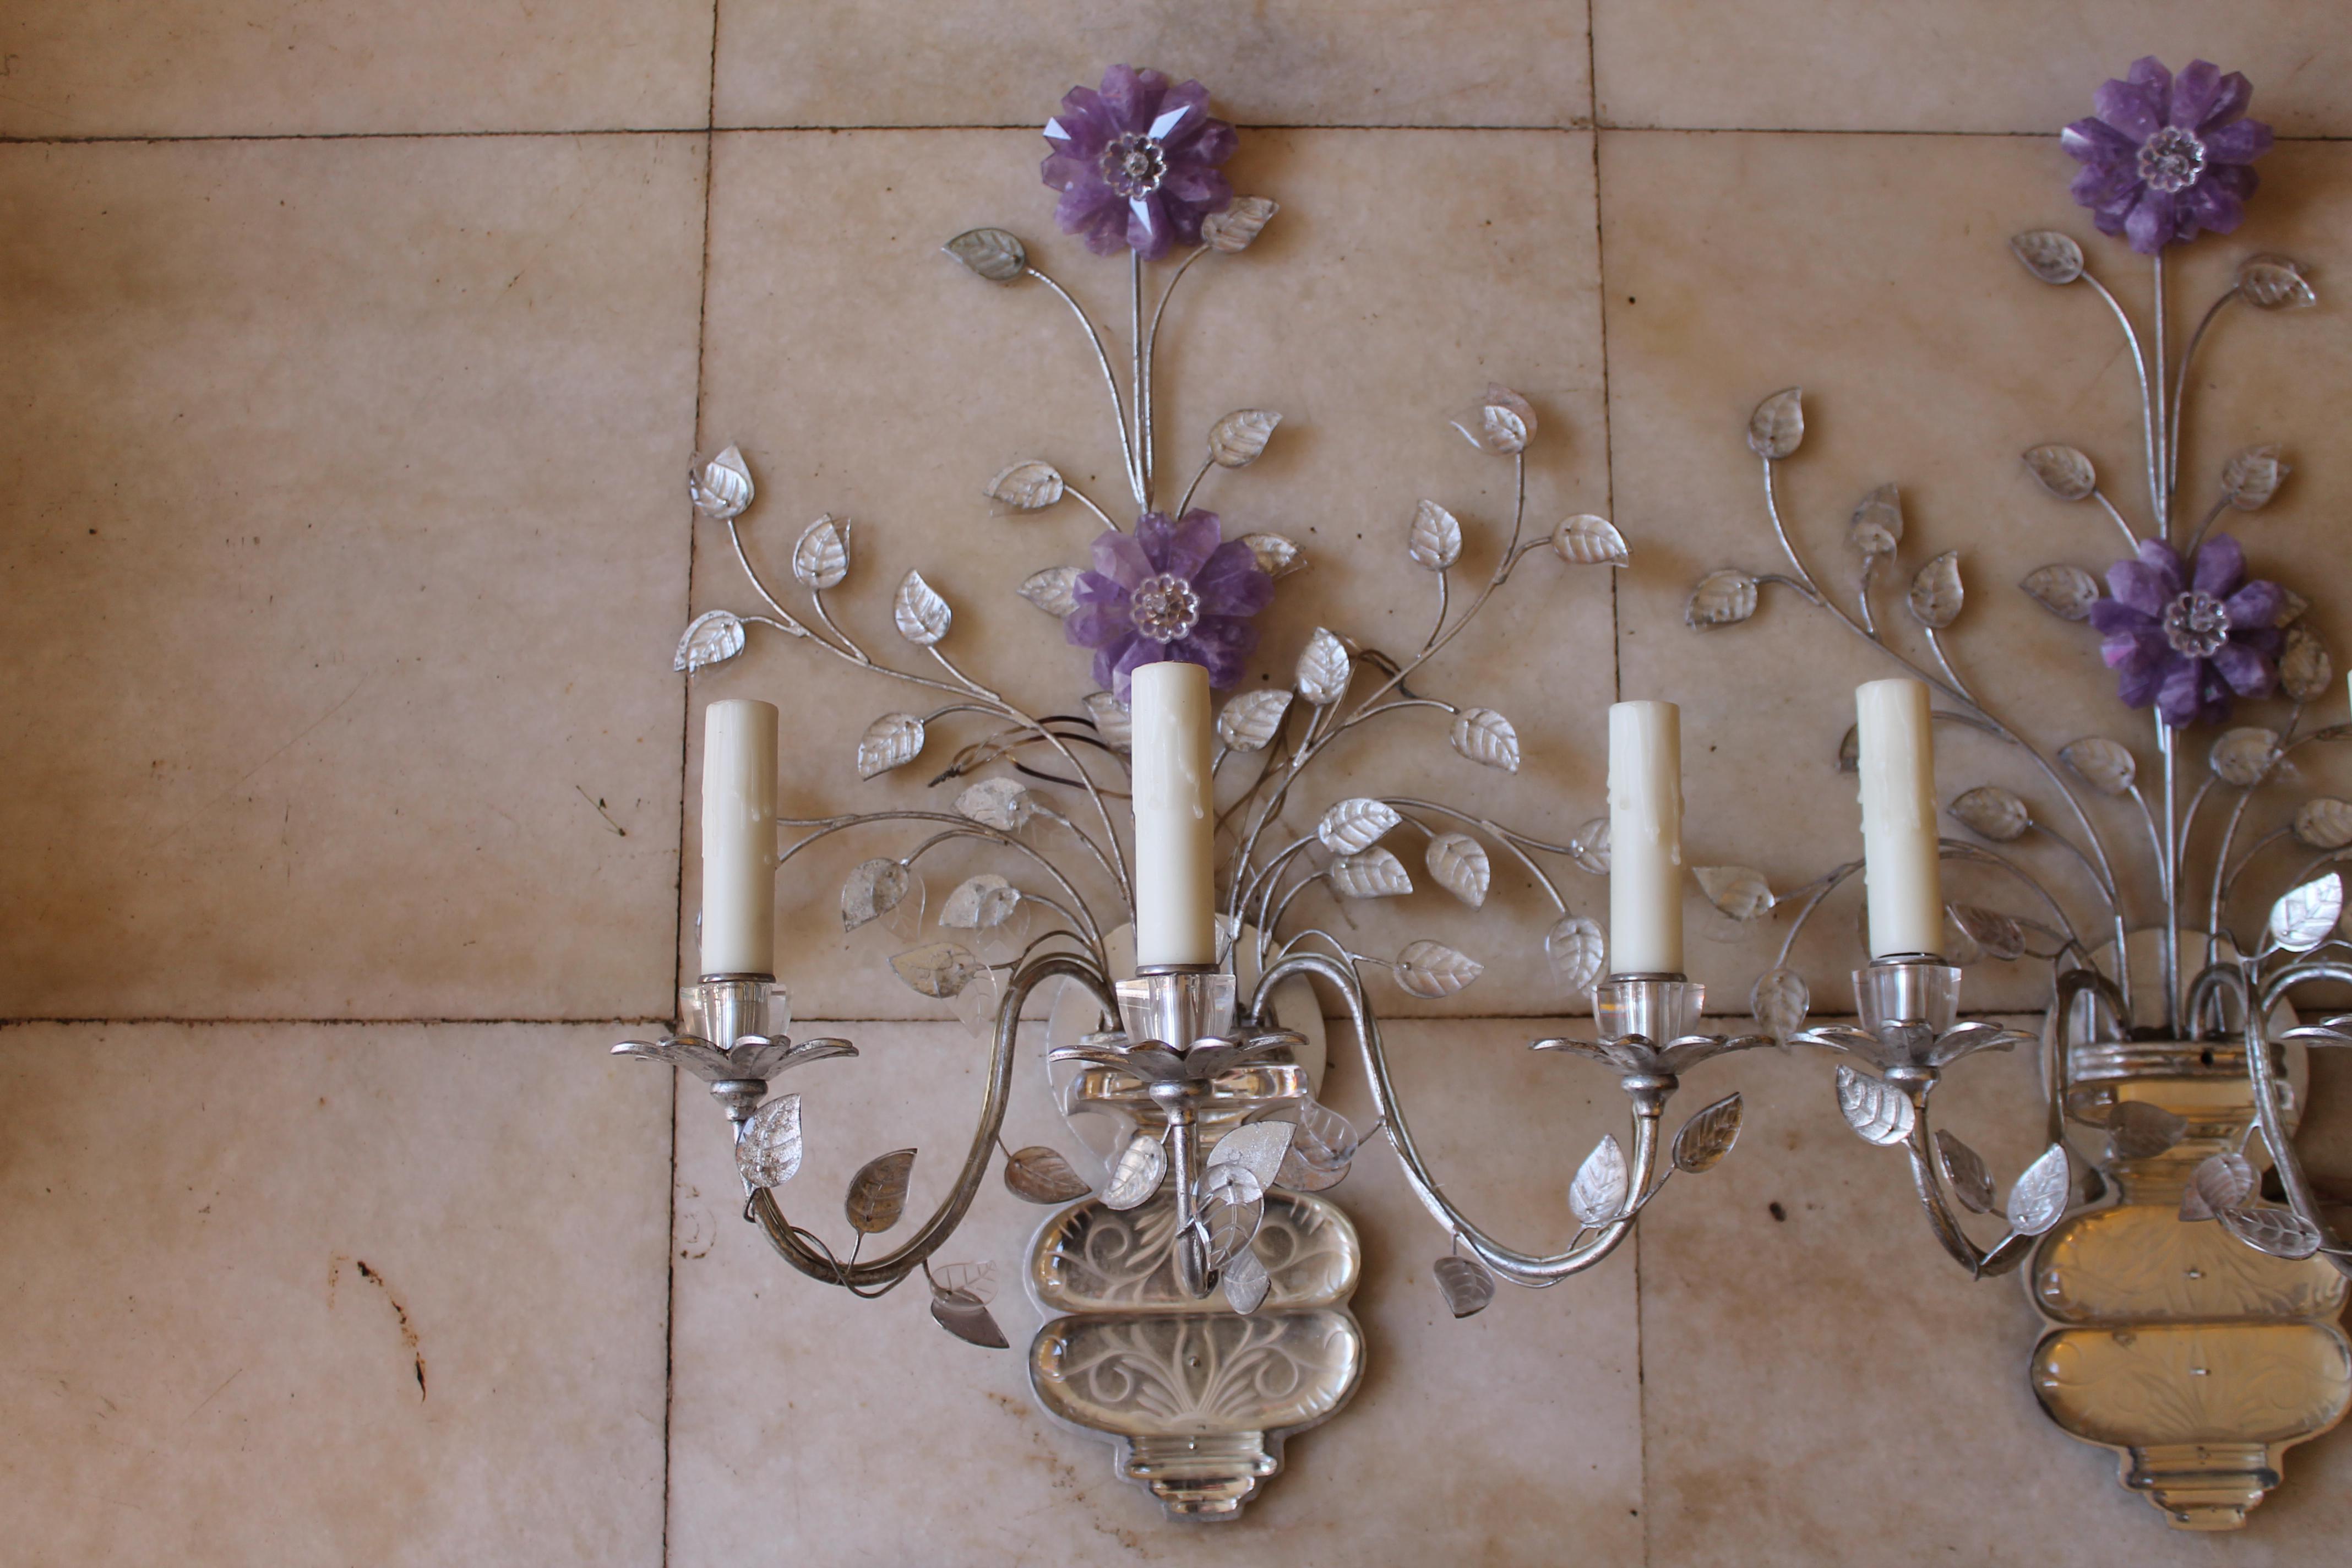 Rare and Unusual Pair of French Amethyst Rock Crystal and Crystal Petal Form Floral Bouquet Wall Sconces attributed to Maison Bagues. This pair is stunning with the full bloom rock crystal flowers and the lovely petals on vines. French estate.